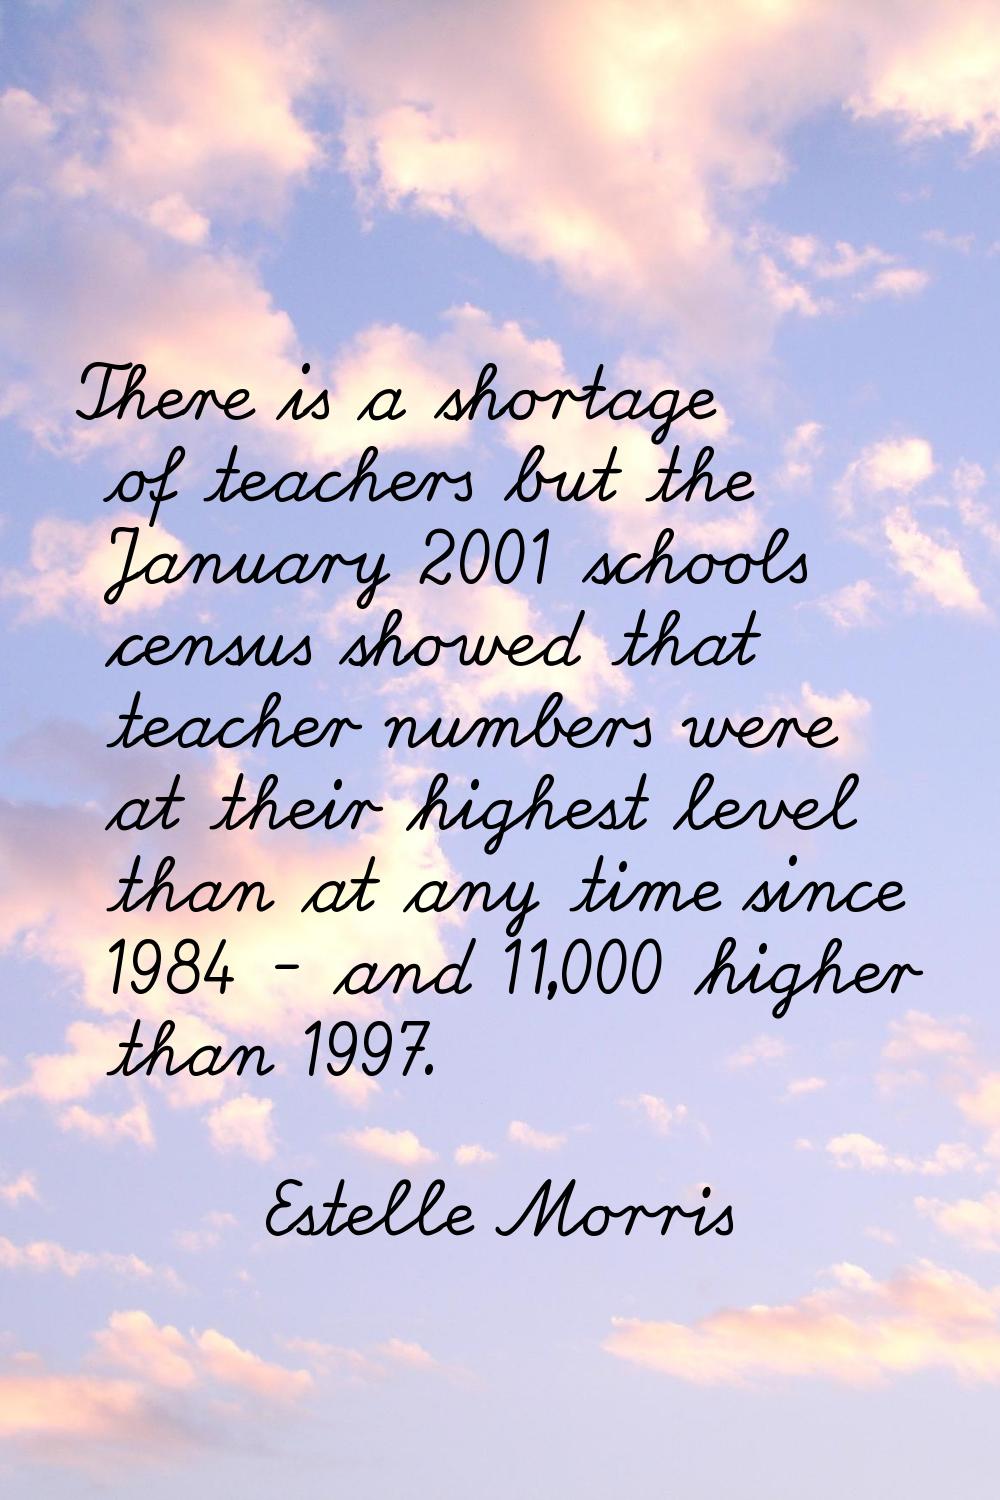 There is a shortage of teachers but the January 2001 schools census showed that teacher numbers wer